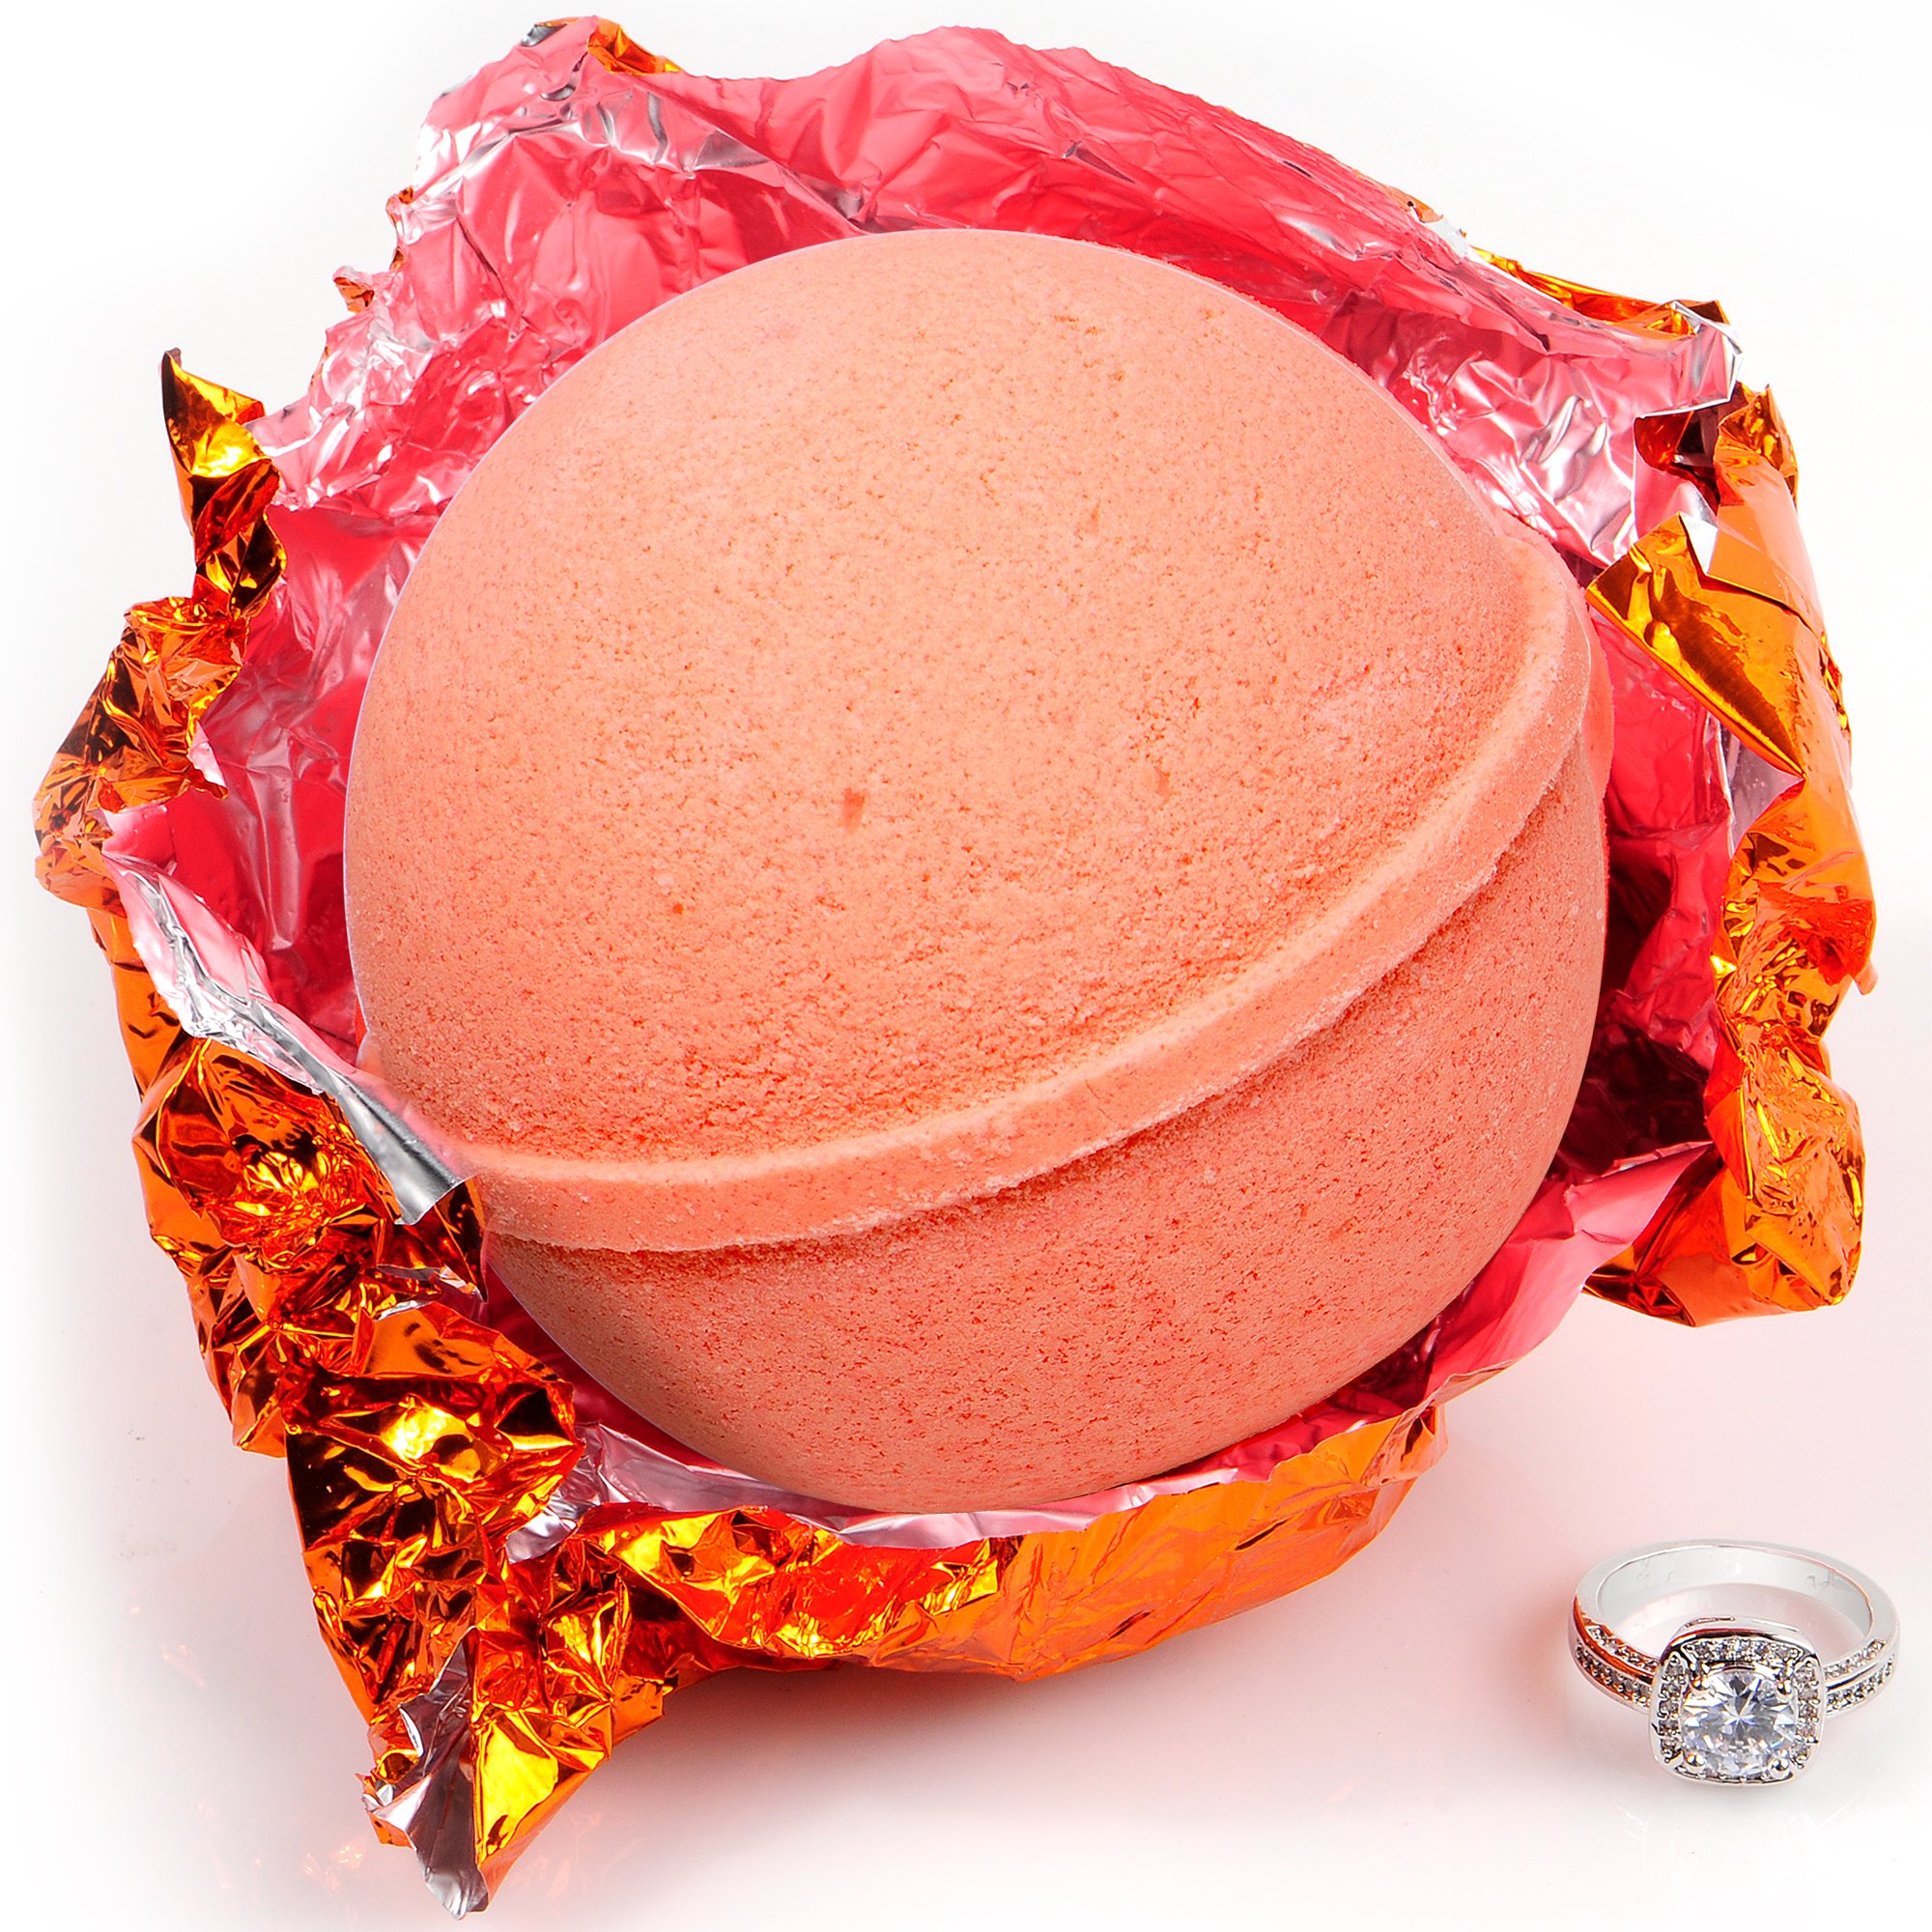 Bath Bomb with Size 6 Ring Inside Life of The Party Pink Grapefruit Extra Large 10 oz. Made in USA